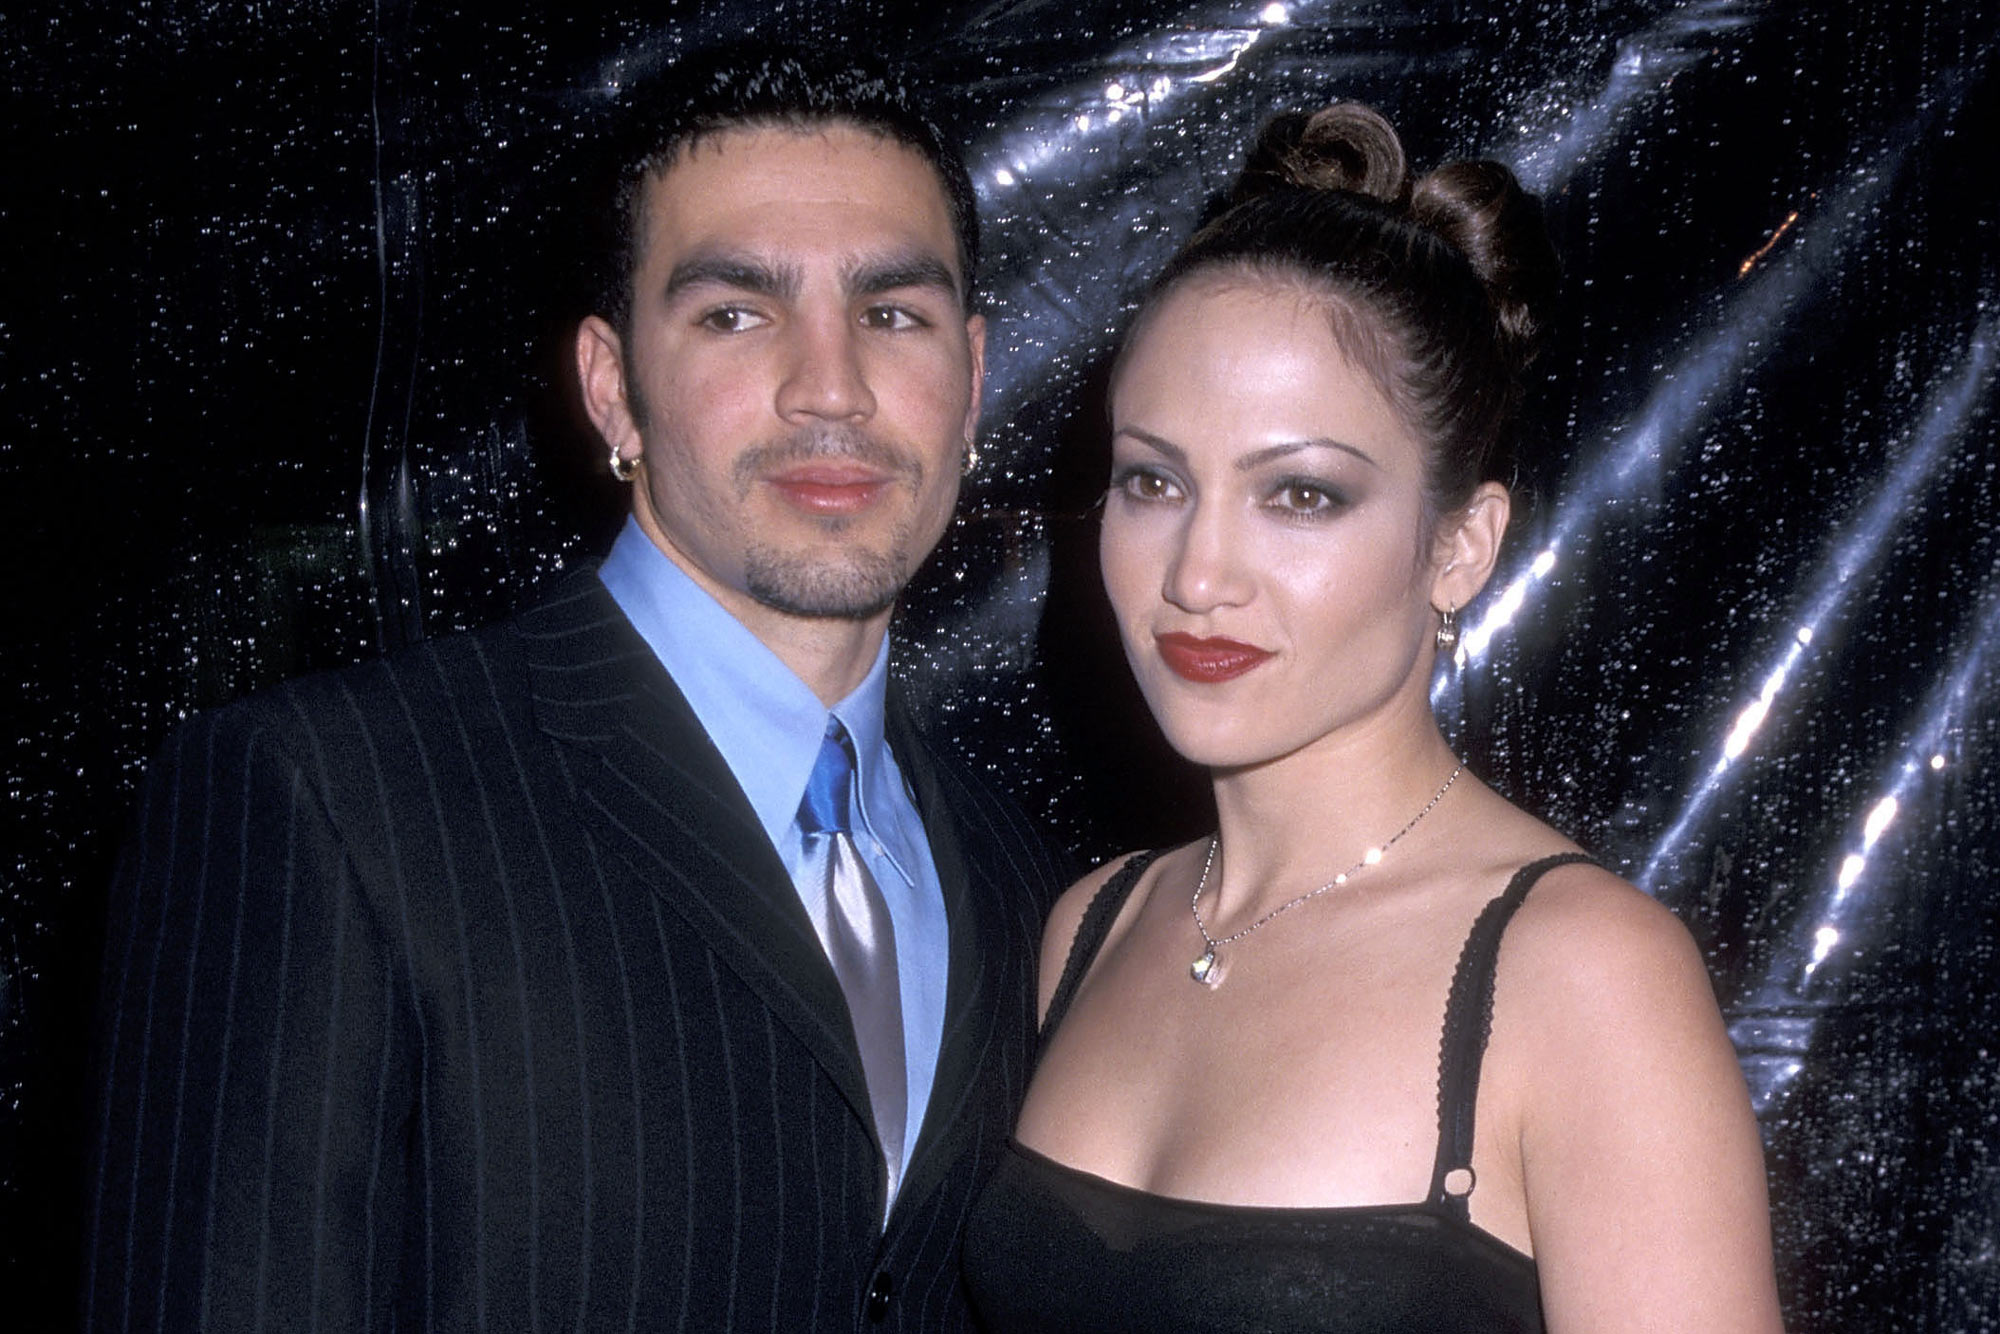 Jennifer Lopez was married to Ojani Noa from 1997 until 1998.